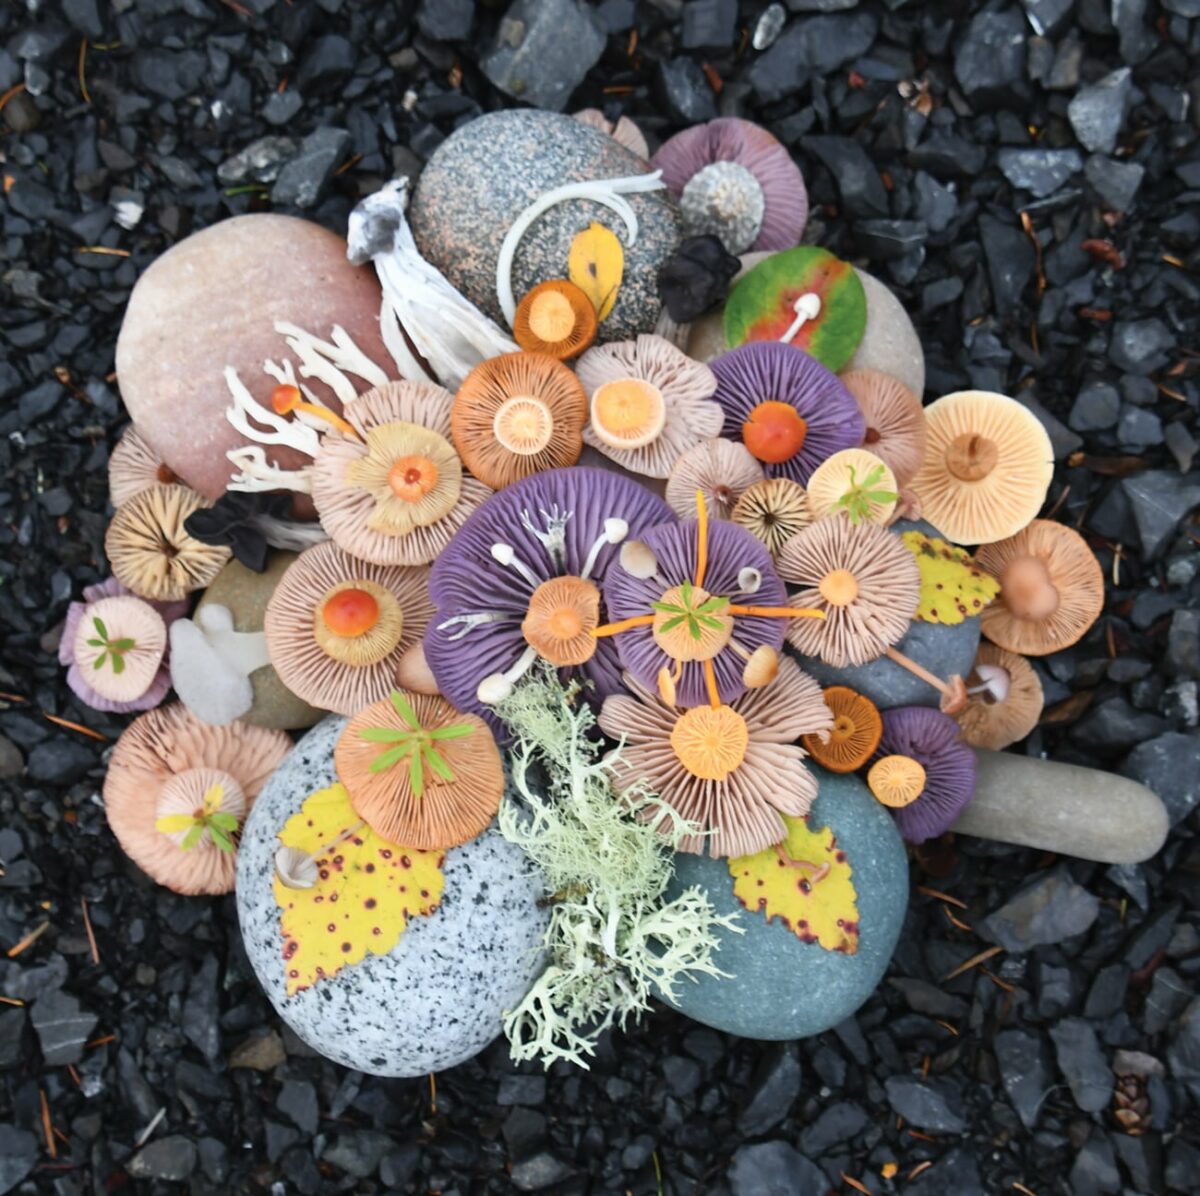 Colorful Arrangements Made Of Mushrooms By Jill Bliss 4